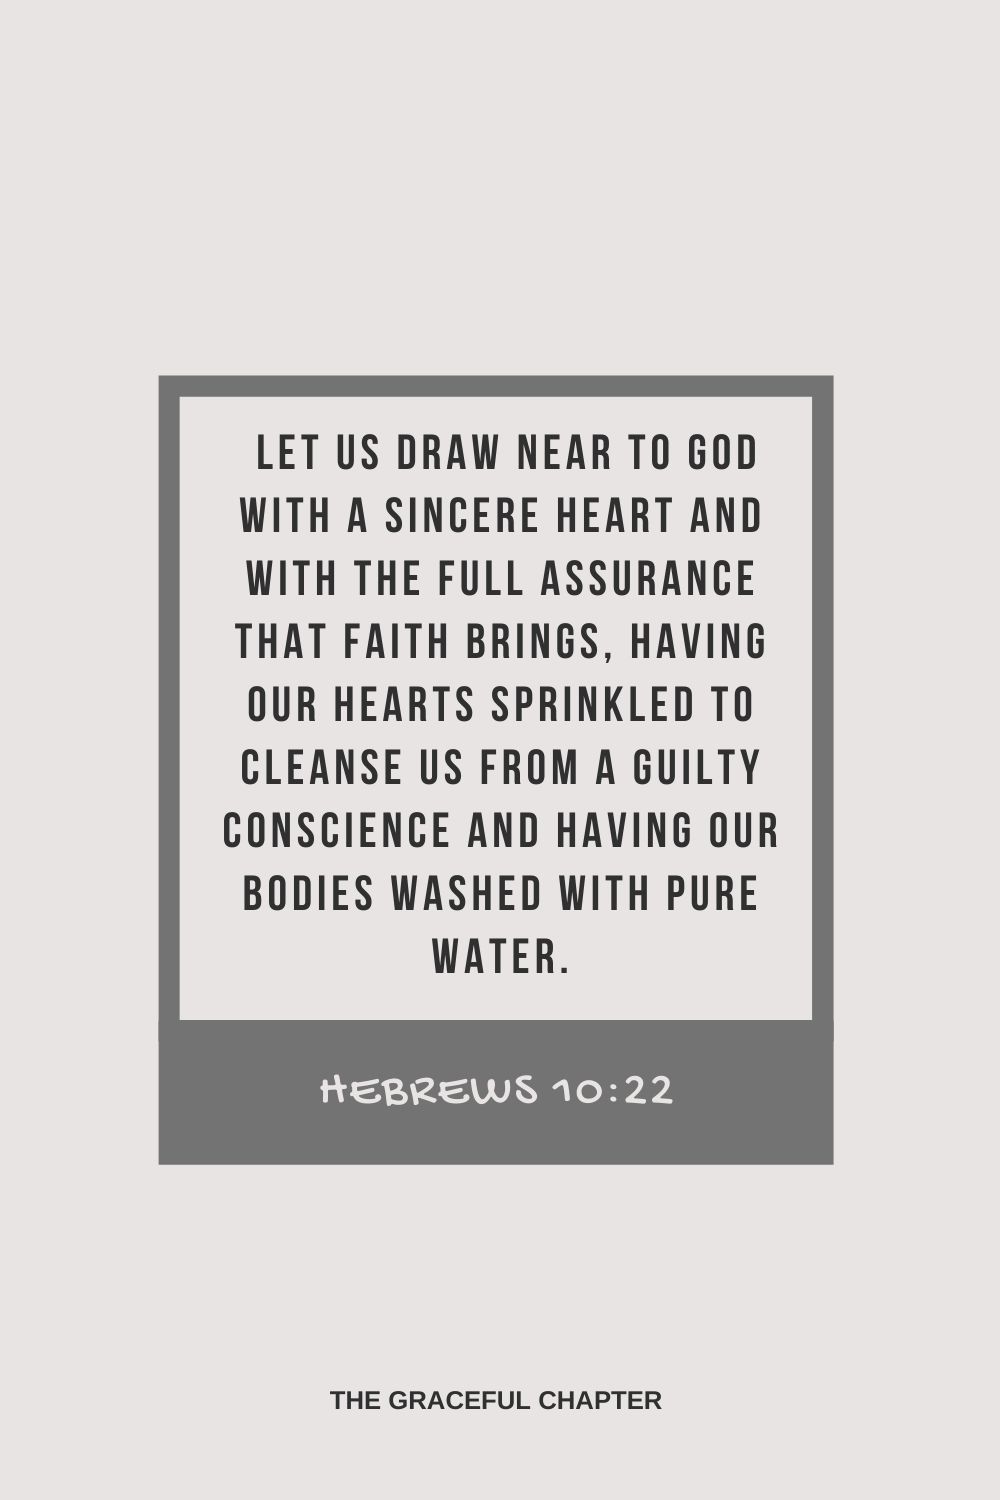 Let us draw near to God with a sincere heart and with the full assurance that faith brings, having our hearts sprinkled to cleanse us from a guilty conscience and having our bodies washed with pure water. Hebrews 10:22